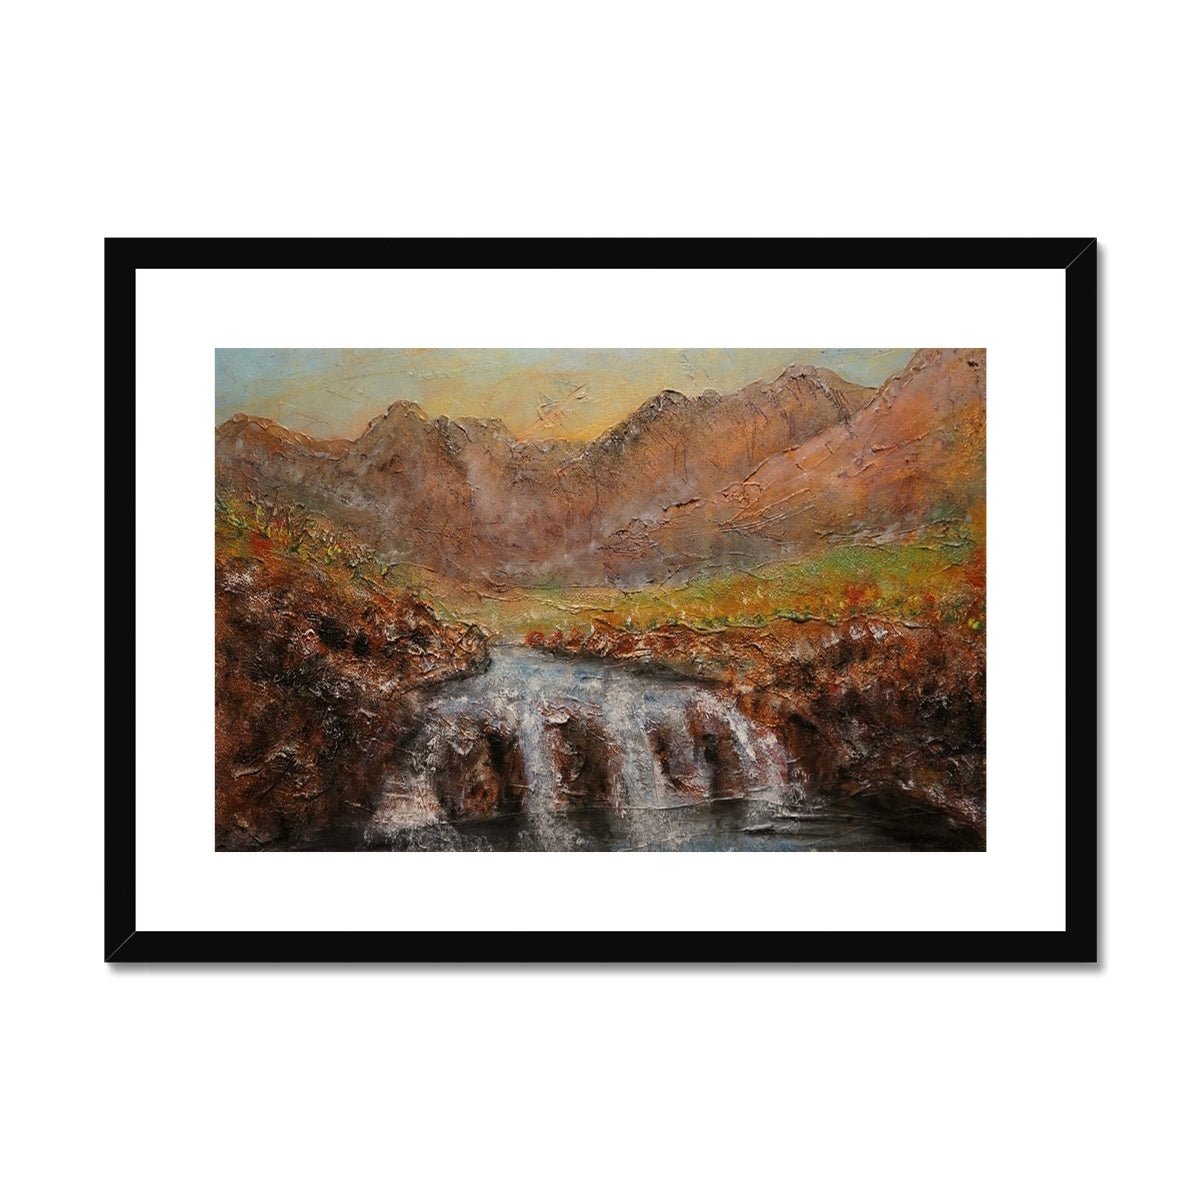 Fairy Pools Dawn Skye Painting | Framed & Mounted Prints From Scotland-Framed & Mounted Prints-Skye Art Gallery-A2 Landscape-Black Frame-Paintings, Prints, Homeware, Art Gifts From Scotland By Scottish Artist Kevin Hunter